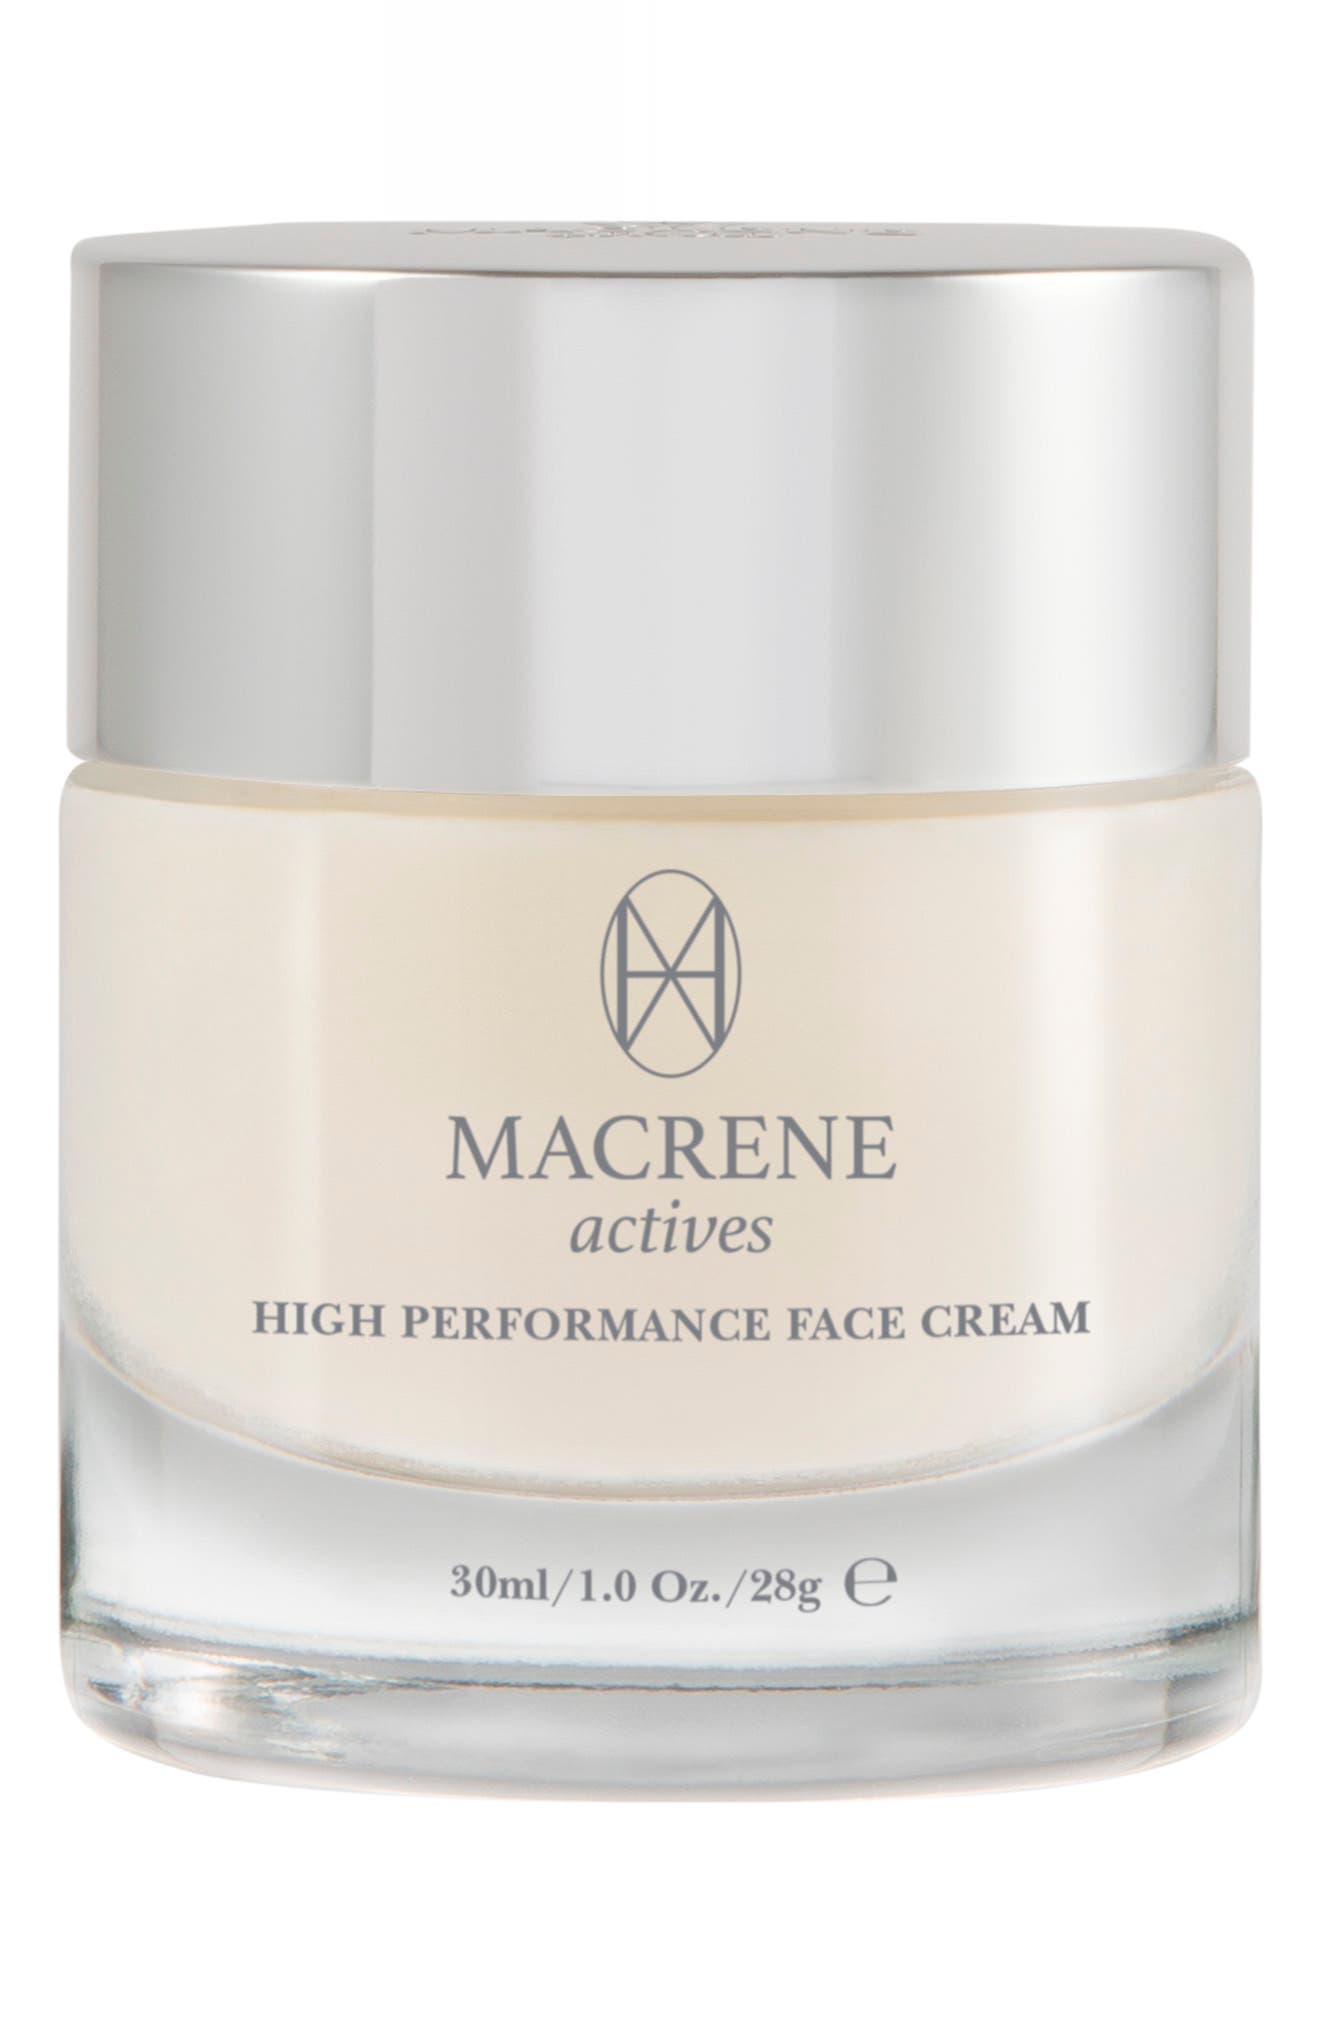 MACRENE ACTIVES High Performance Face Cream at Nordstrom